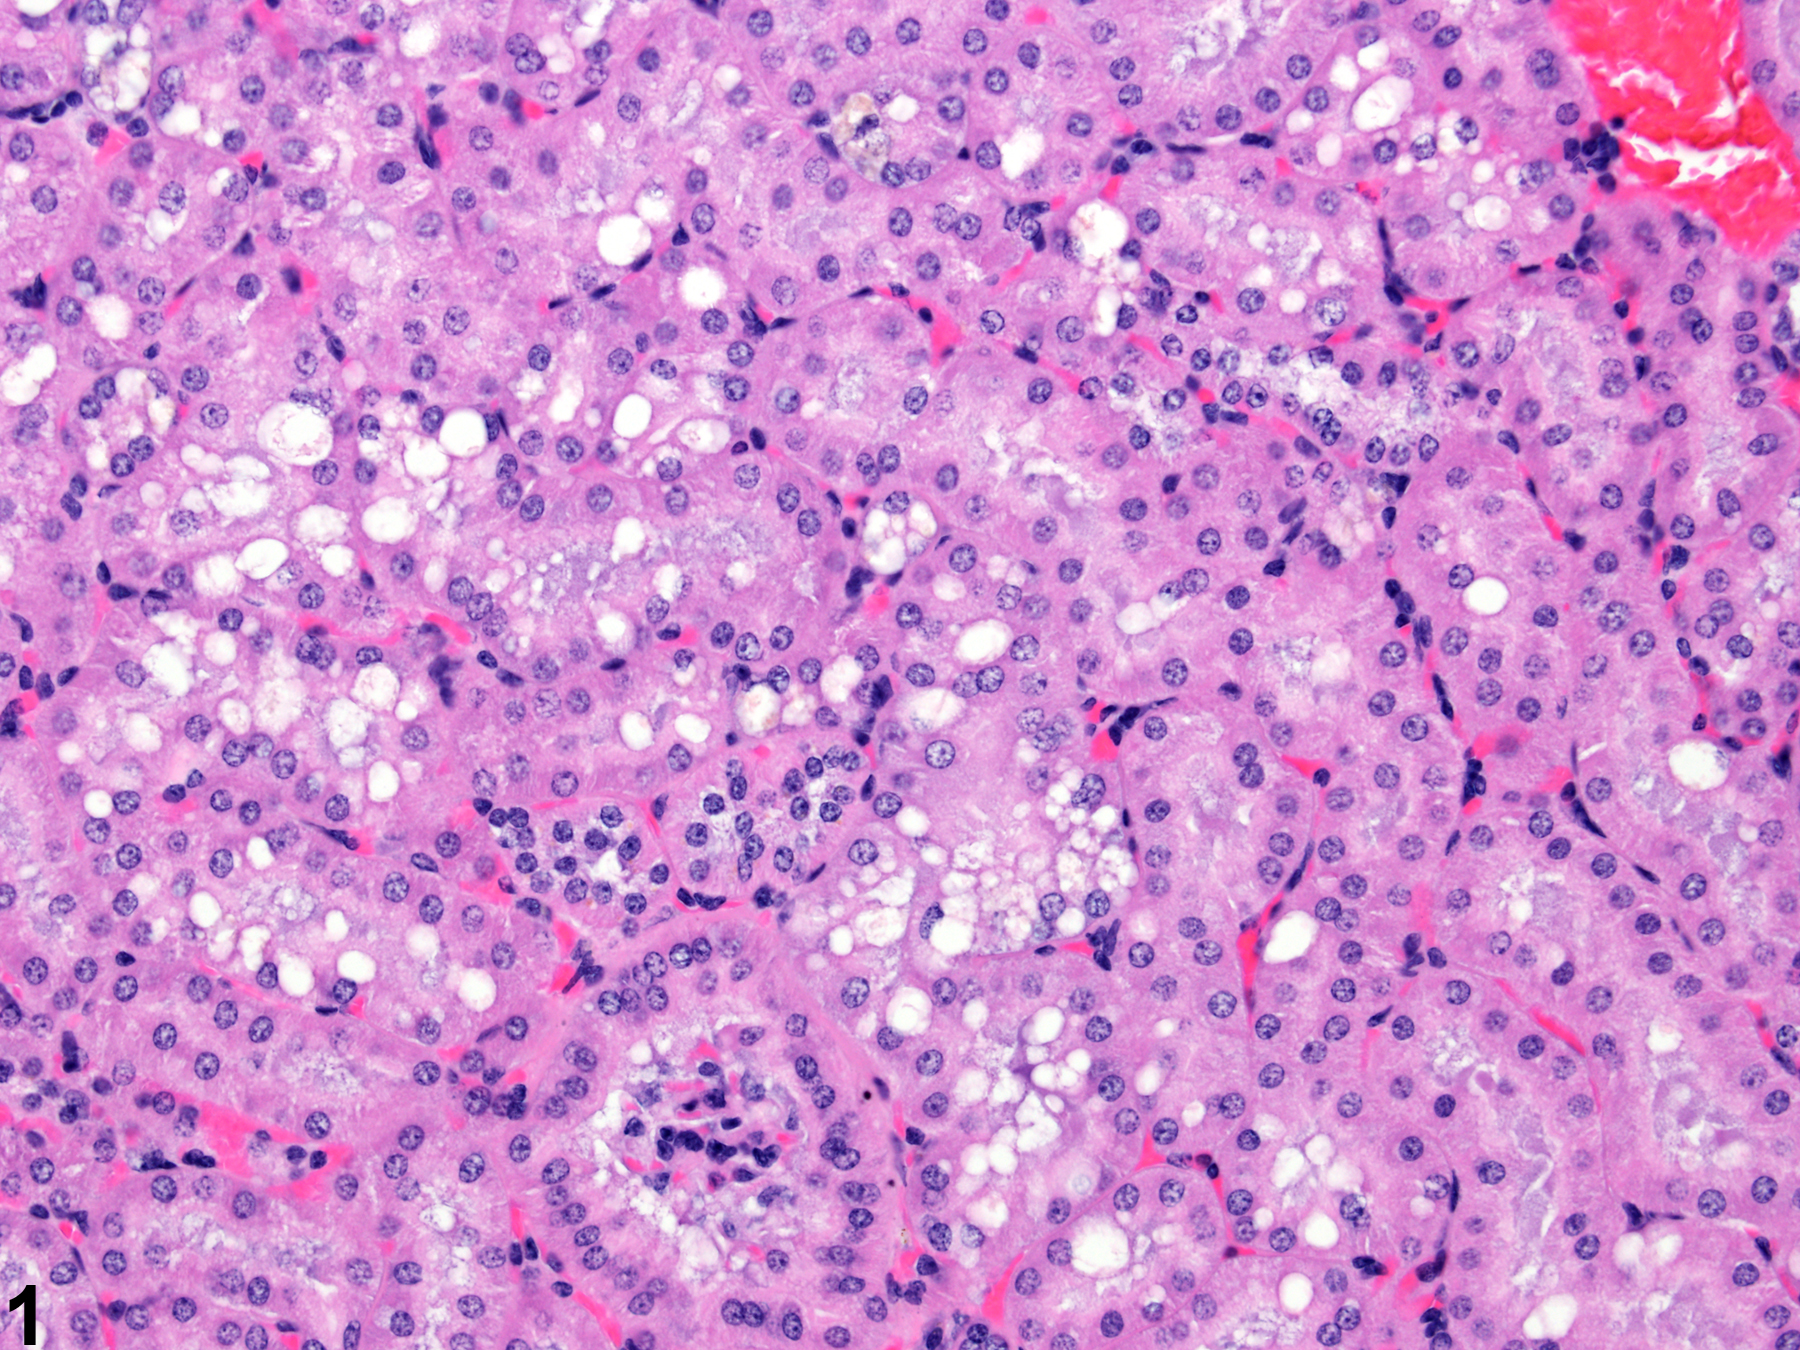 Image of renal tubule cytoplasmic vacuoles (normal) in the kidney from a male B6C3F1 mouse in a chronic study